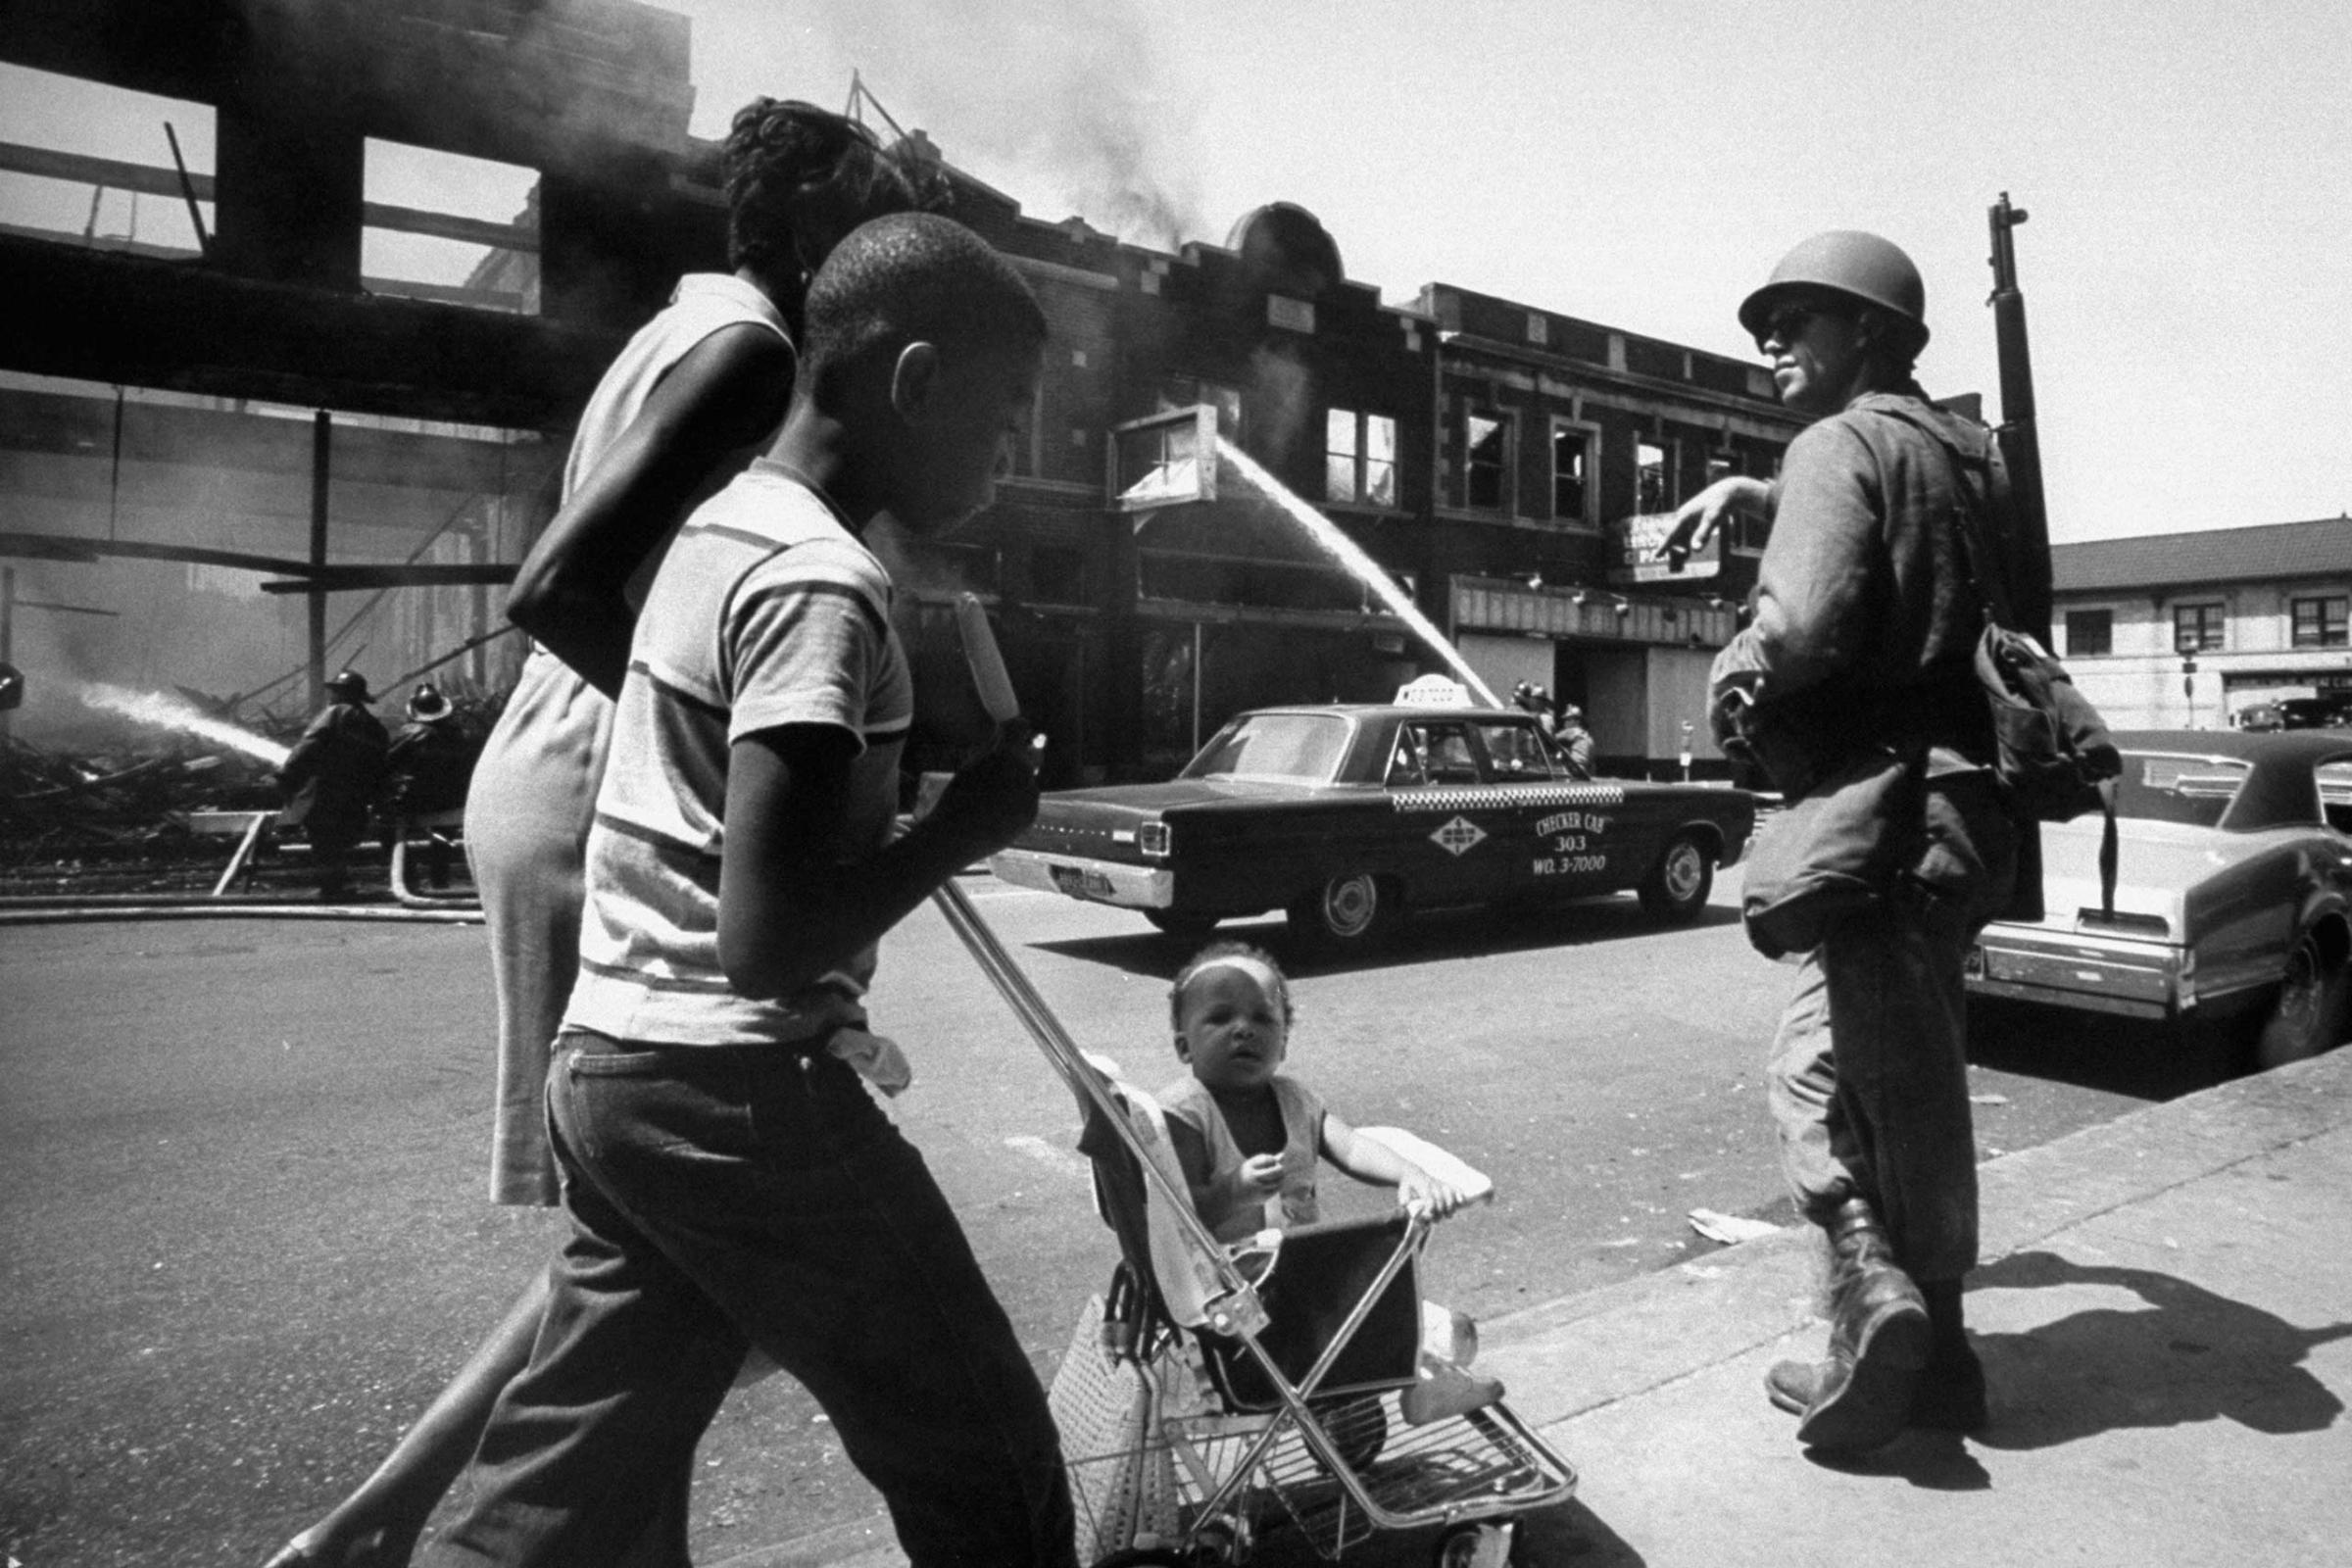 Detroit Burning: Photos From the 12th Street Riot, 1967